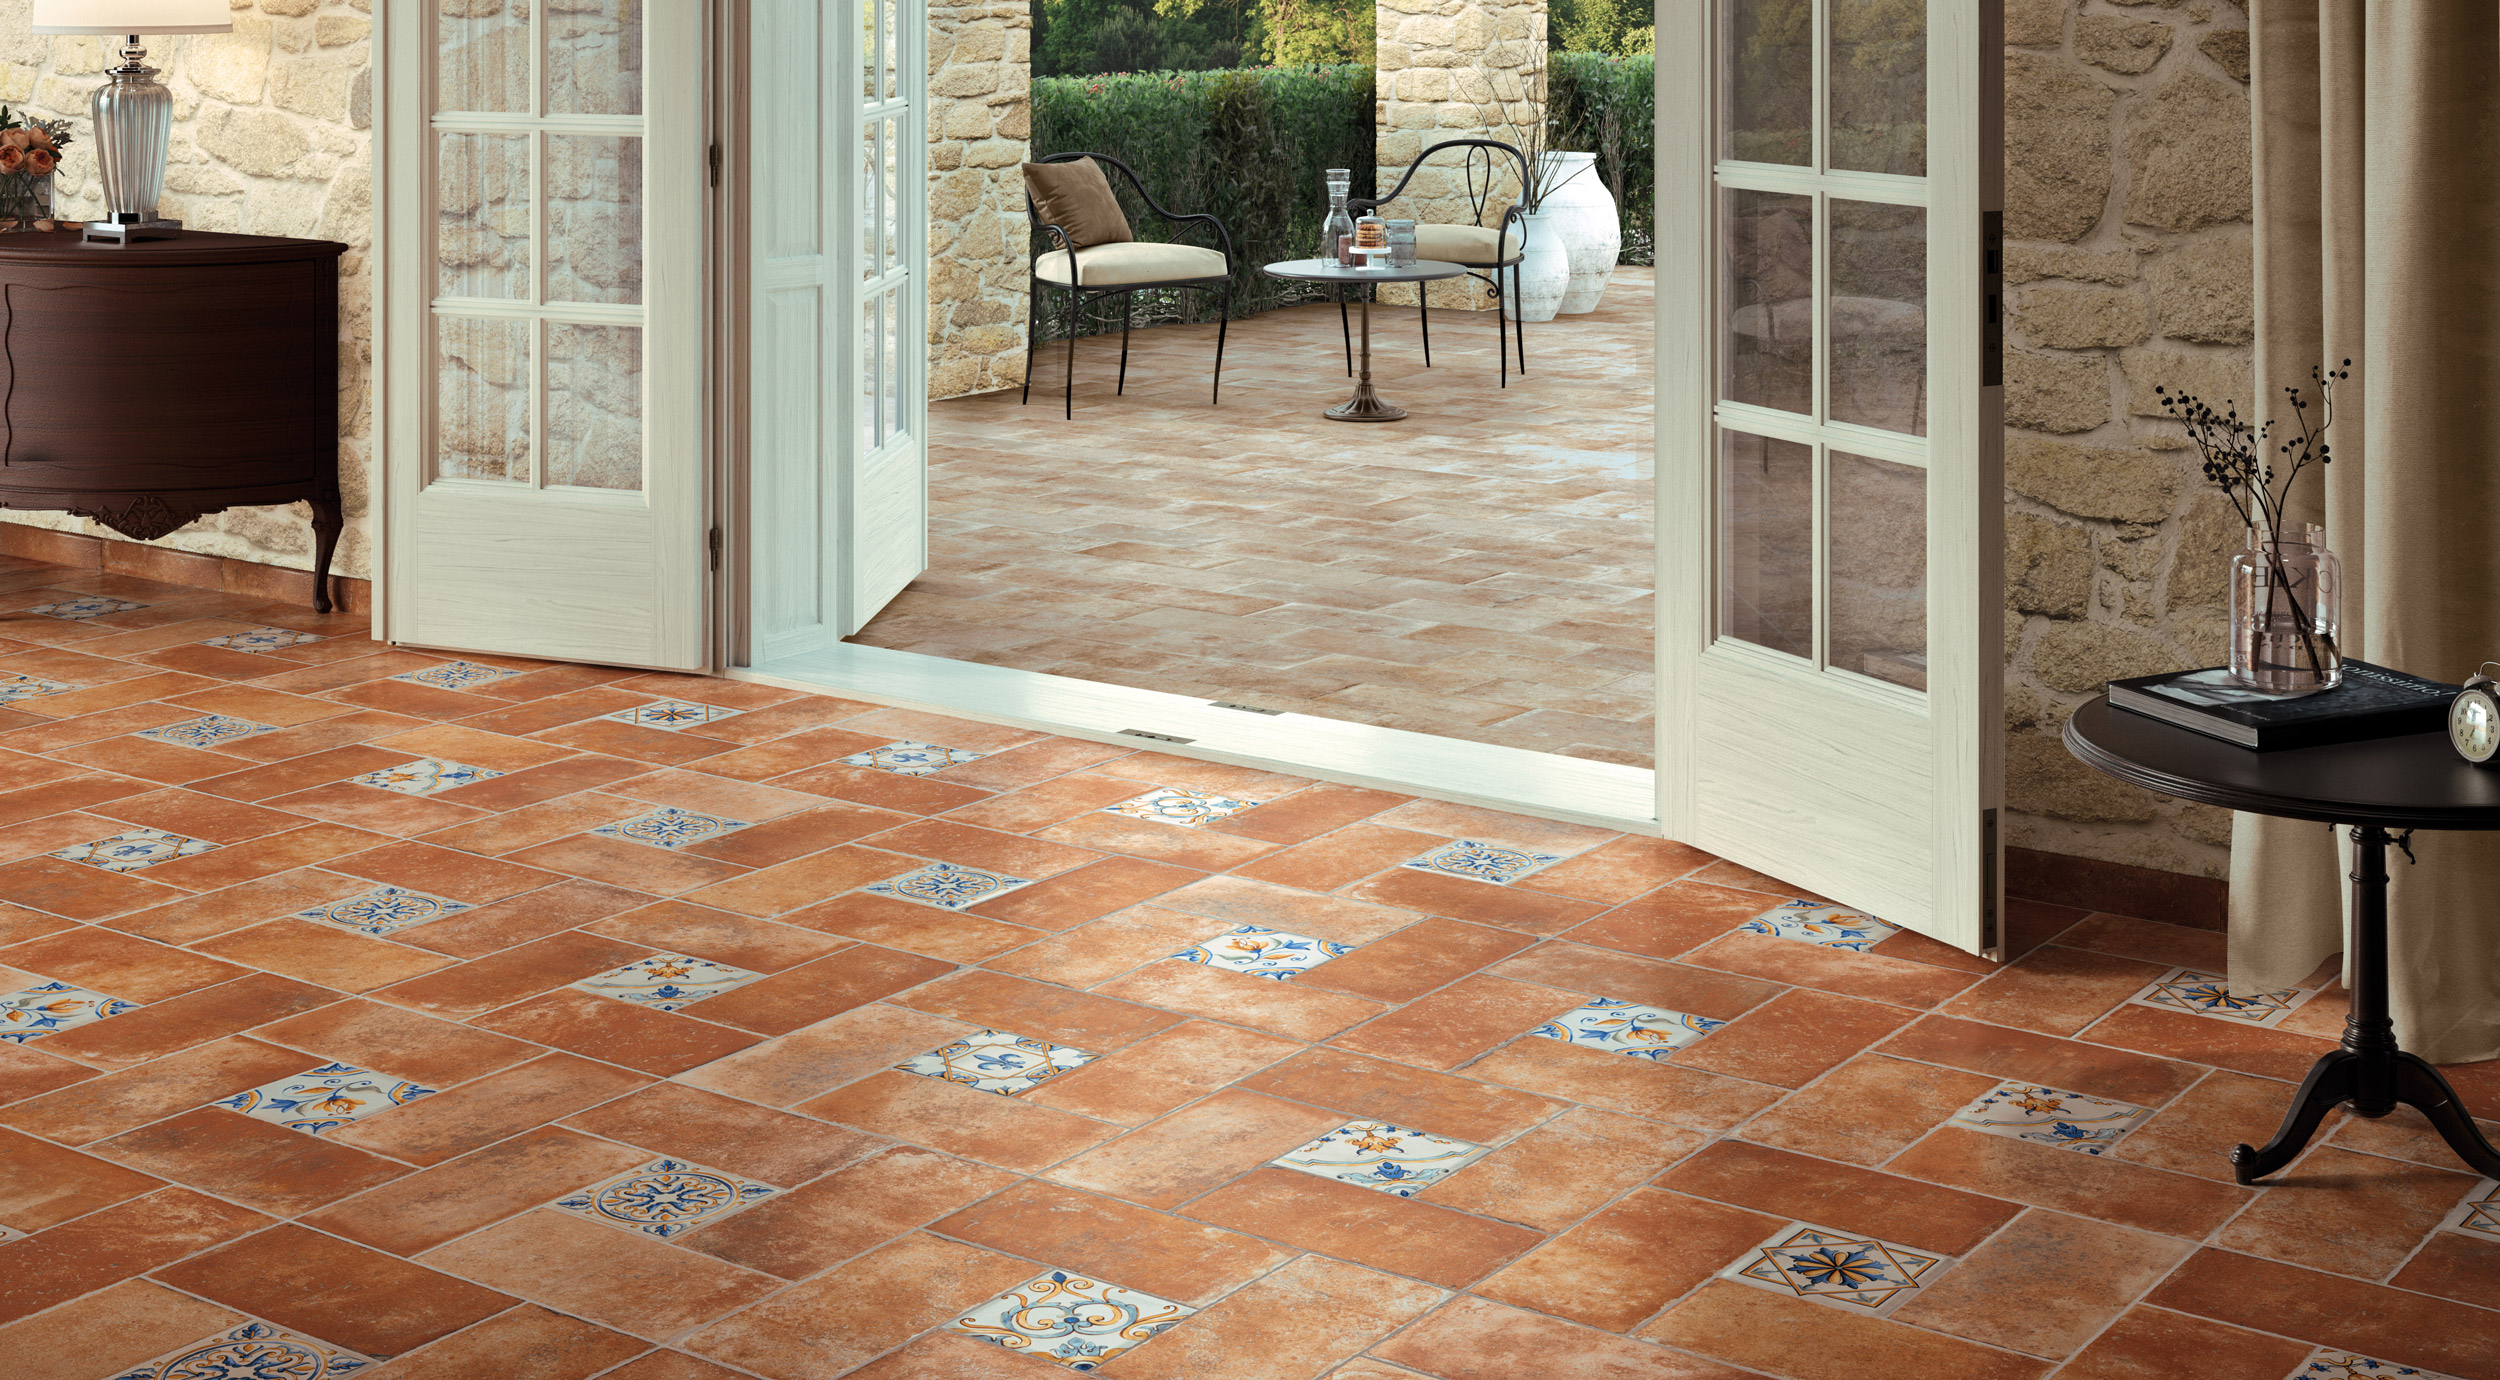 Carrelage rouge Tuscany by Ceramica Rondine